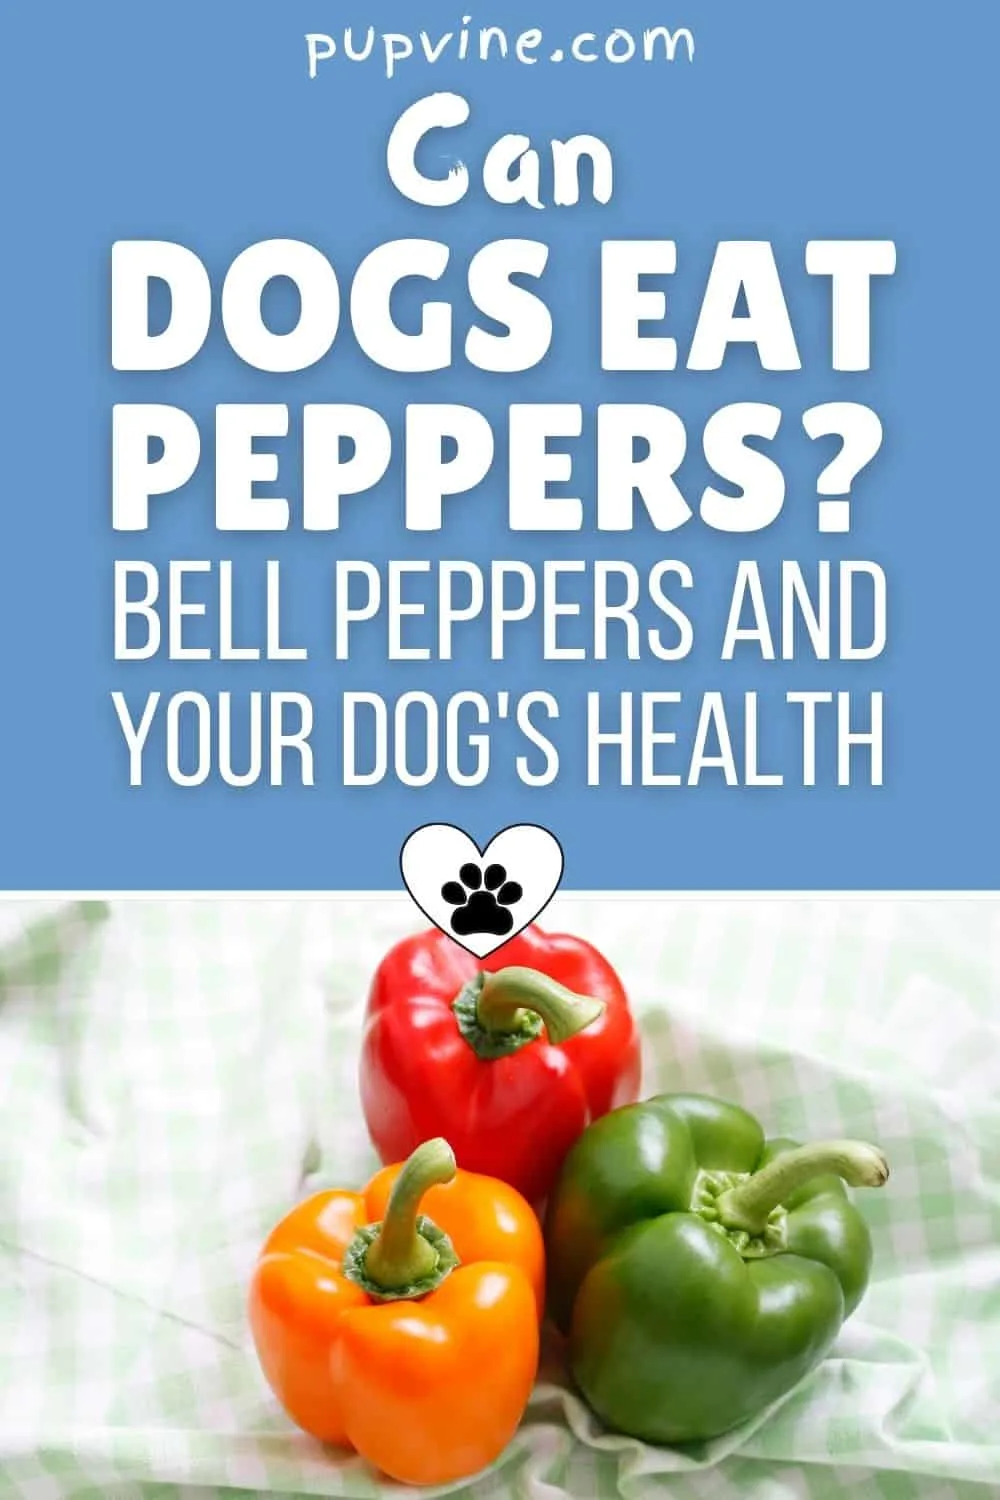 Can Dogs Eat Peppers? Bell Peppers And Your Dog's Health